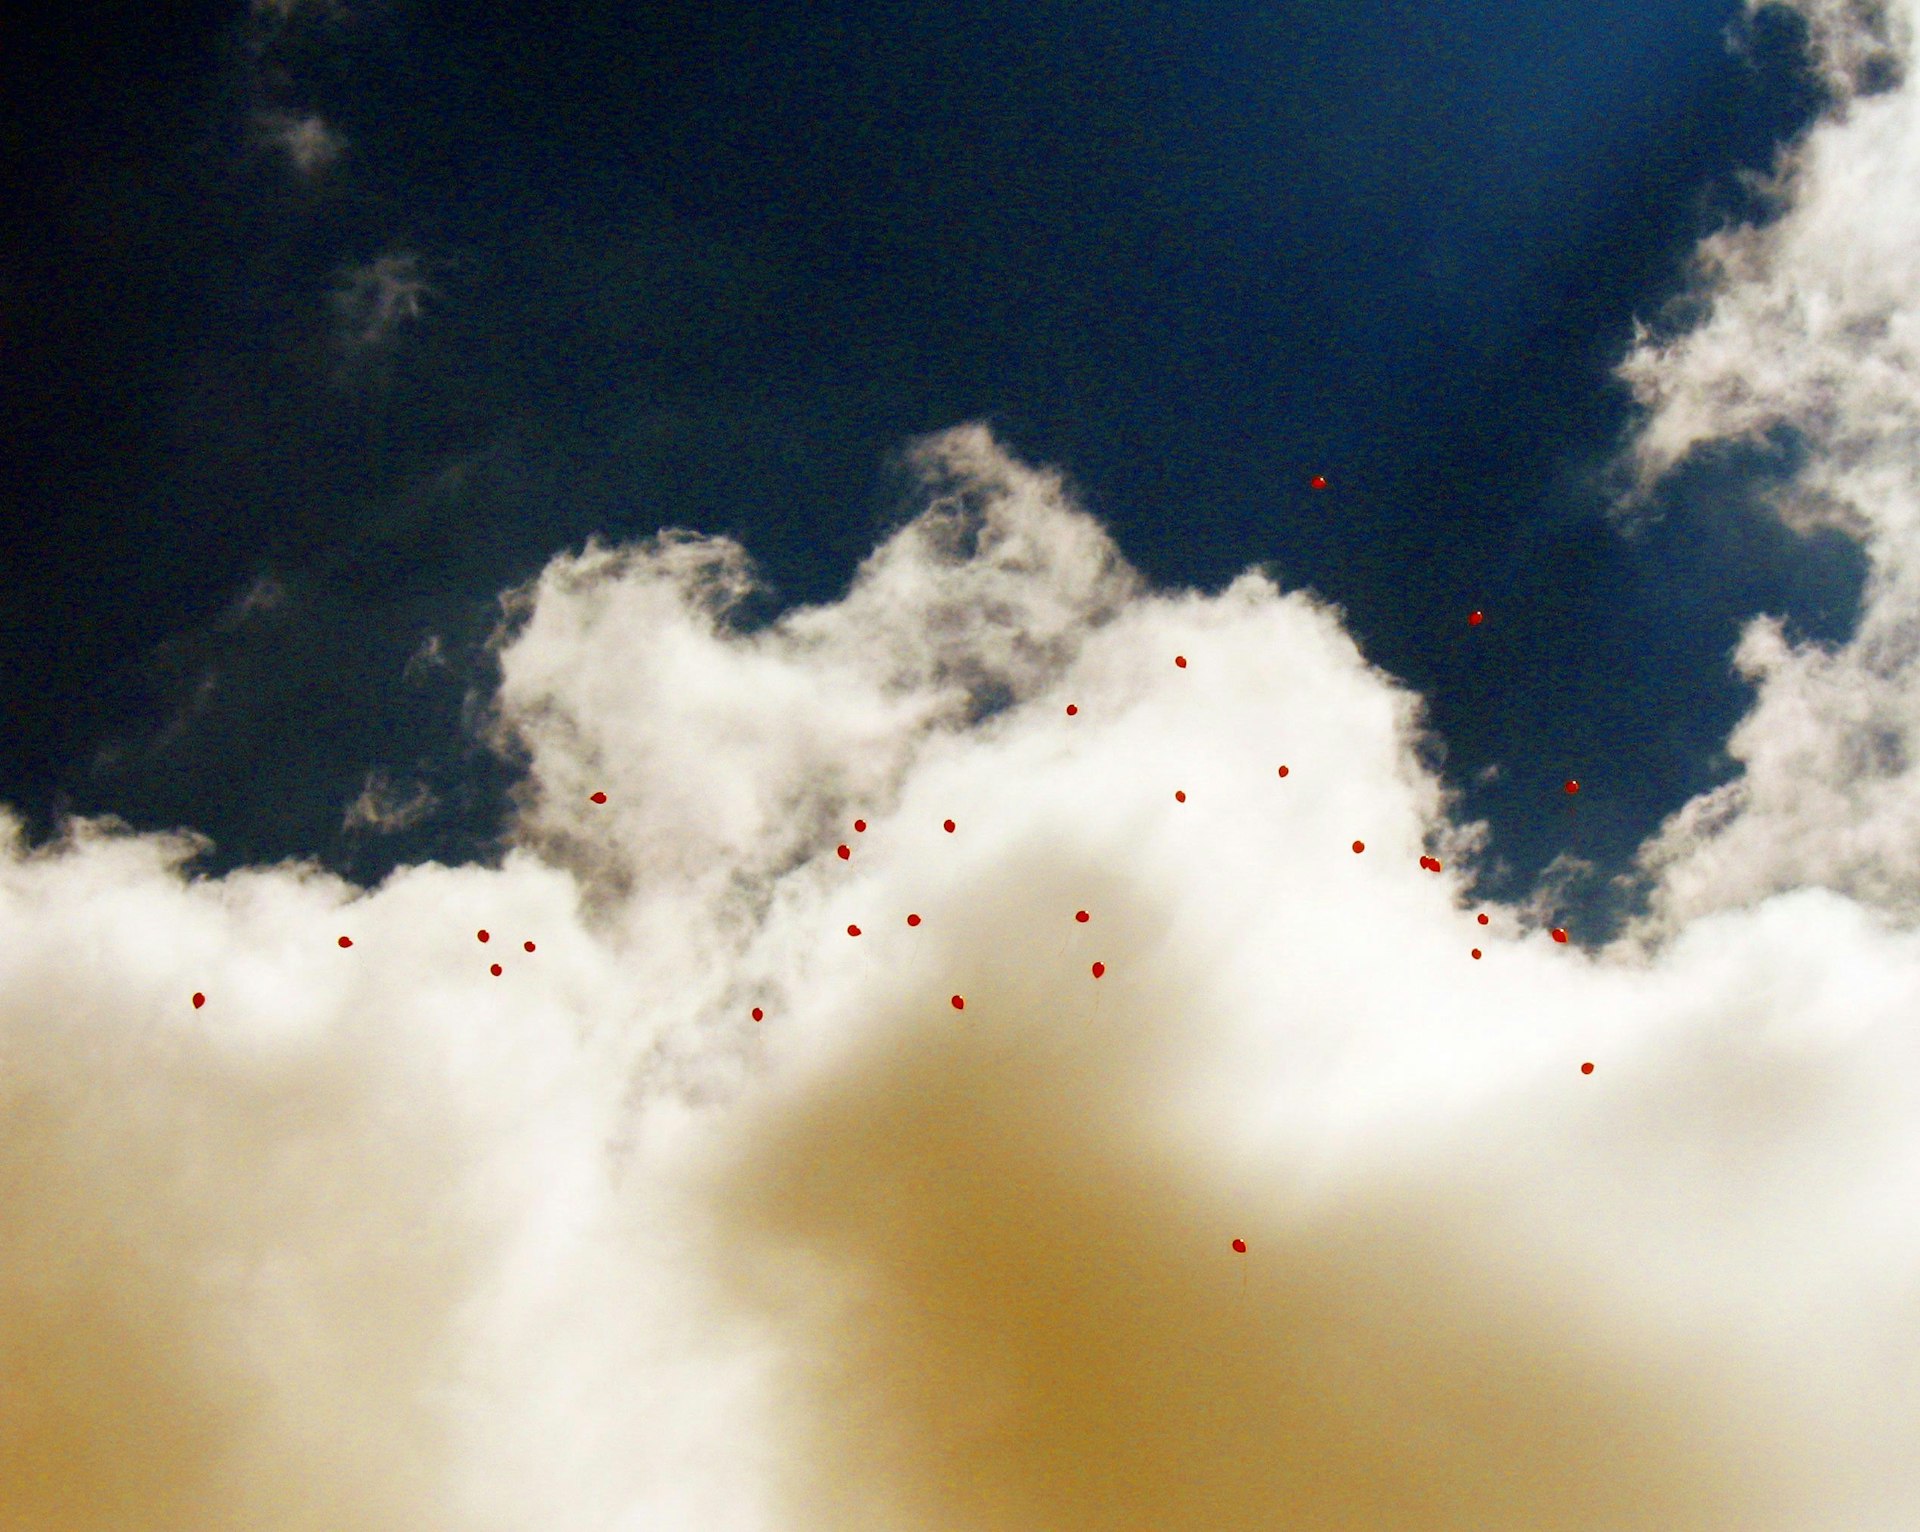 Commemorative balloons released into the sky.